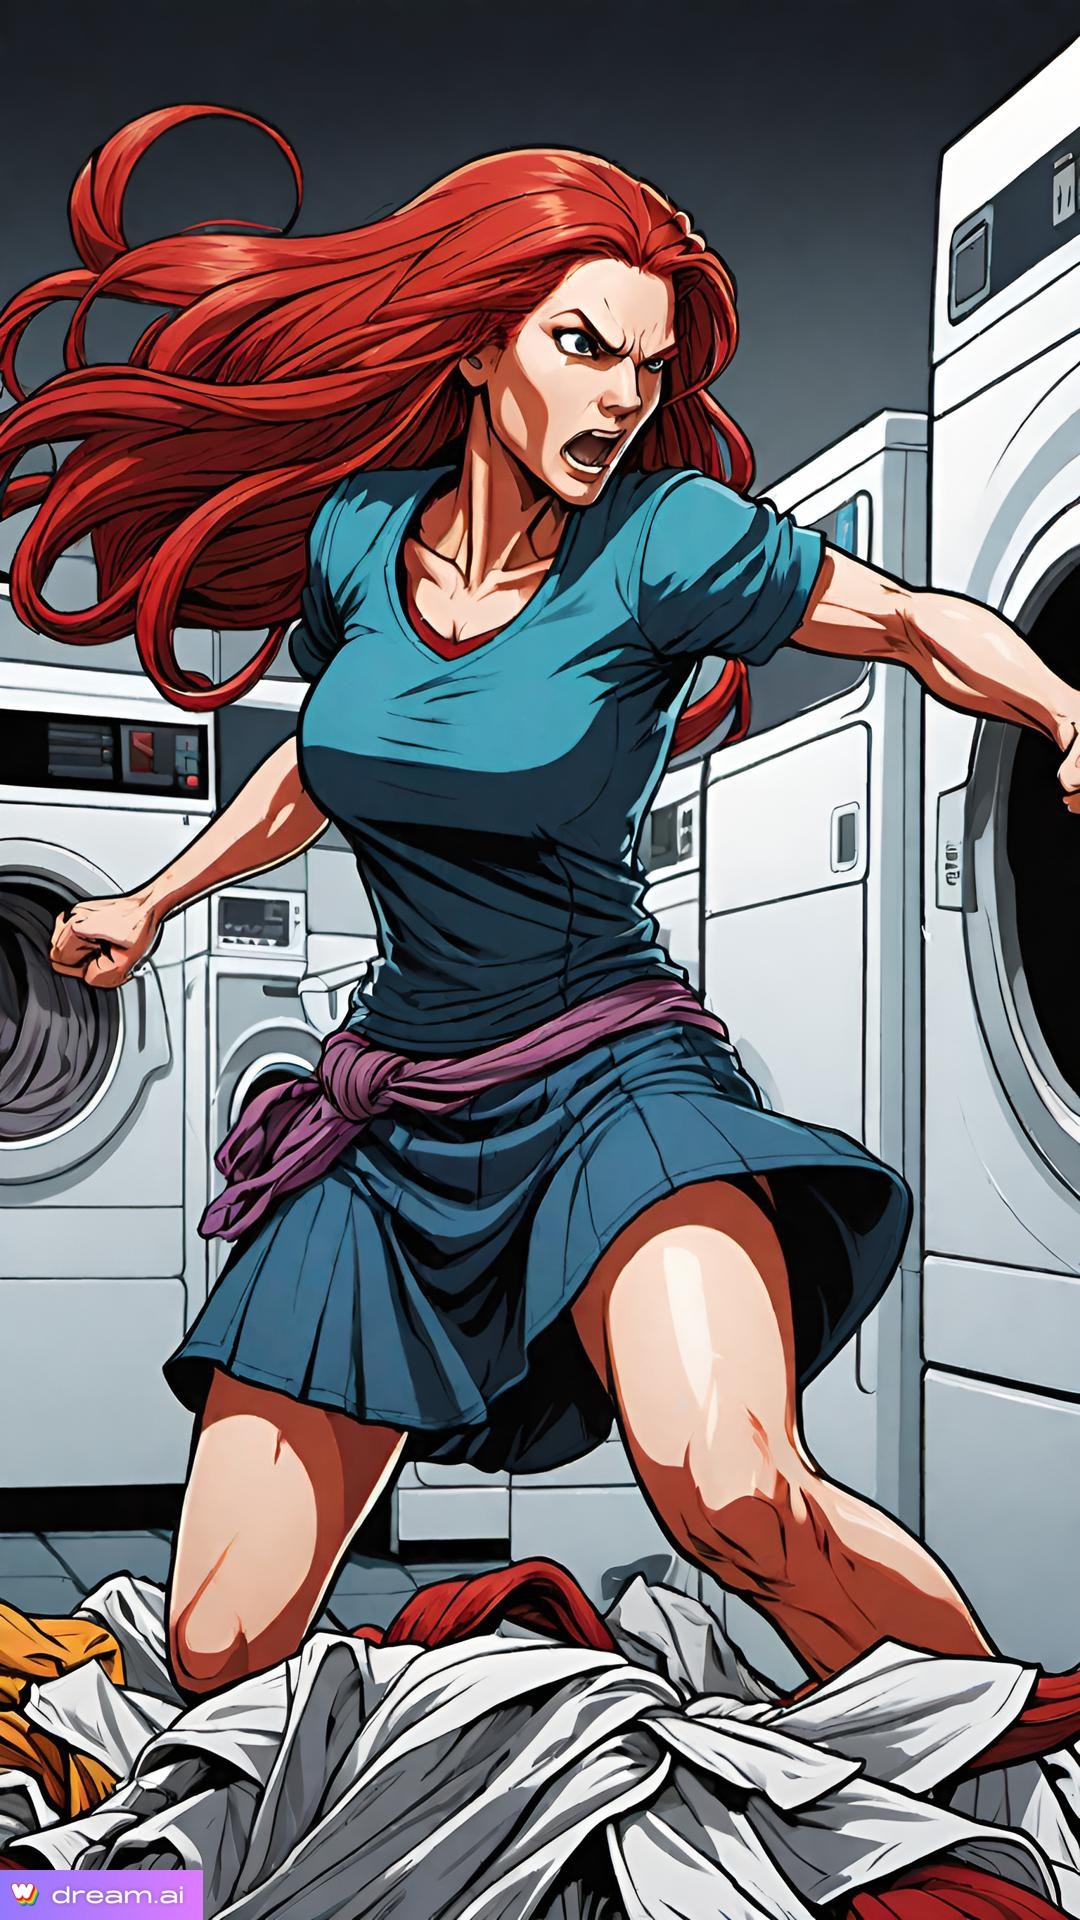 a woman with red hair running in front of a washing machine